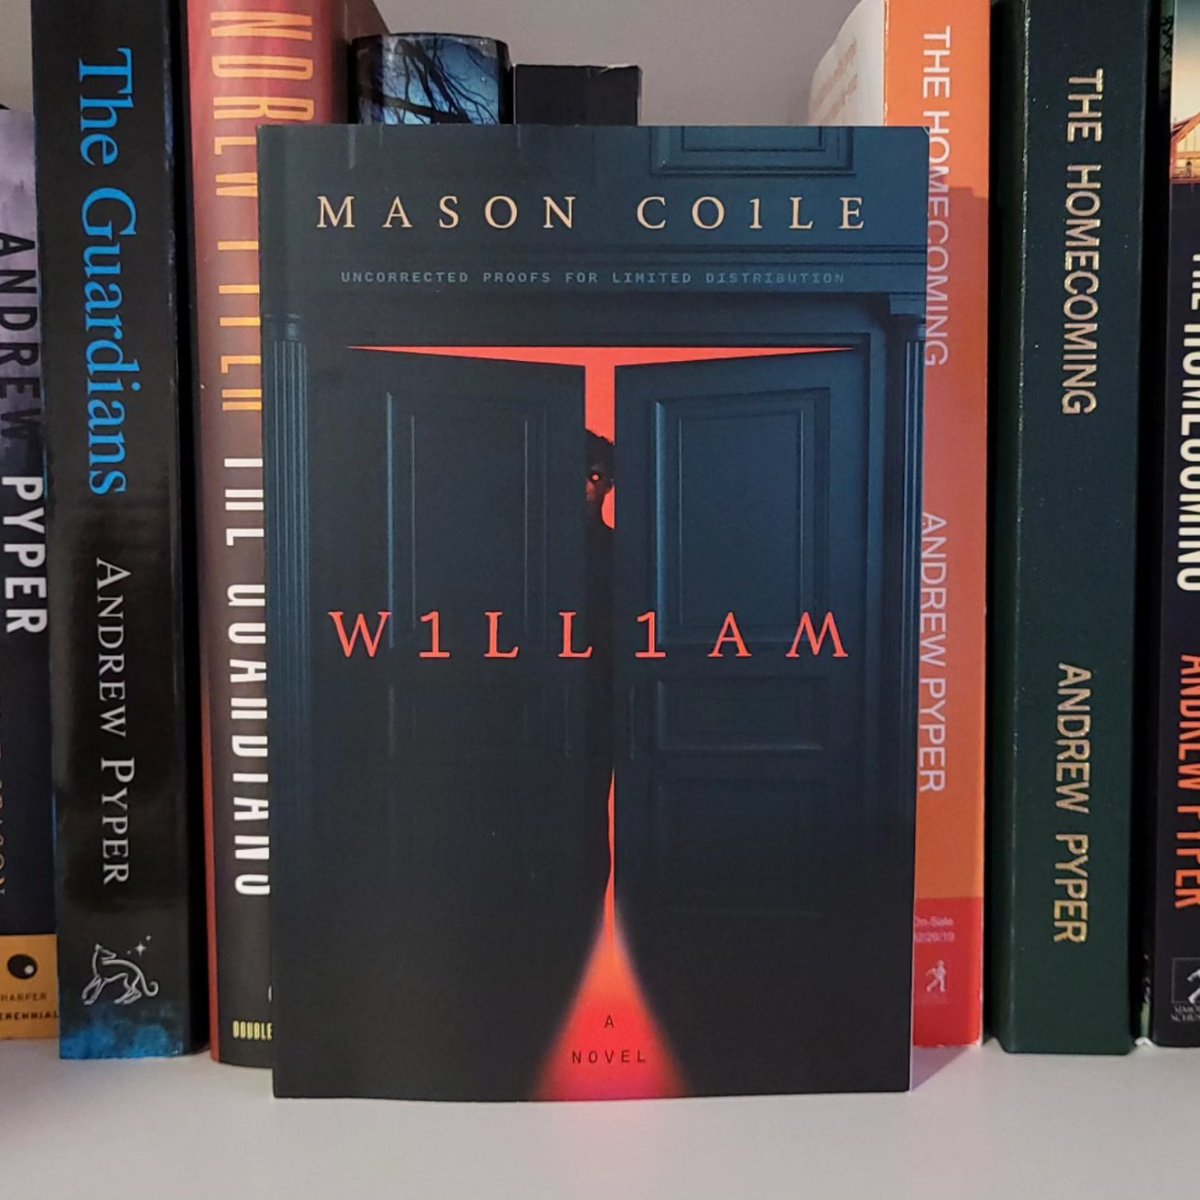 Well. So, I got some book mail, & it's kind of knocked me for a loop. Andrew Pyper has always been the kindest person in the world, & one of the most supportive. I never expected in a million years for an ARC of his Mason Coile debut, 'William,' to arrive in the mail! 1/2